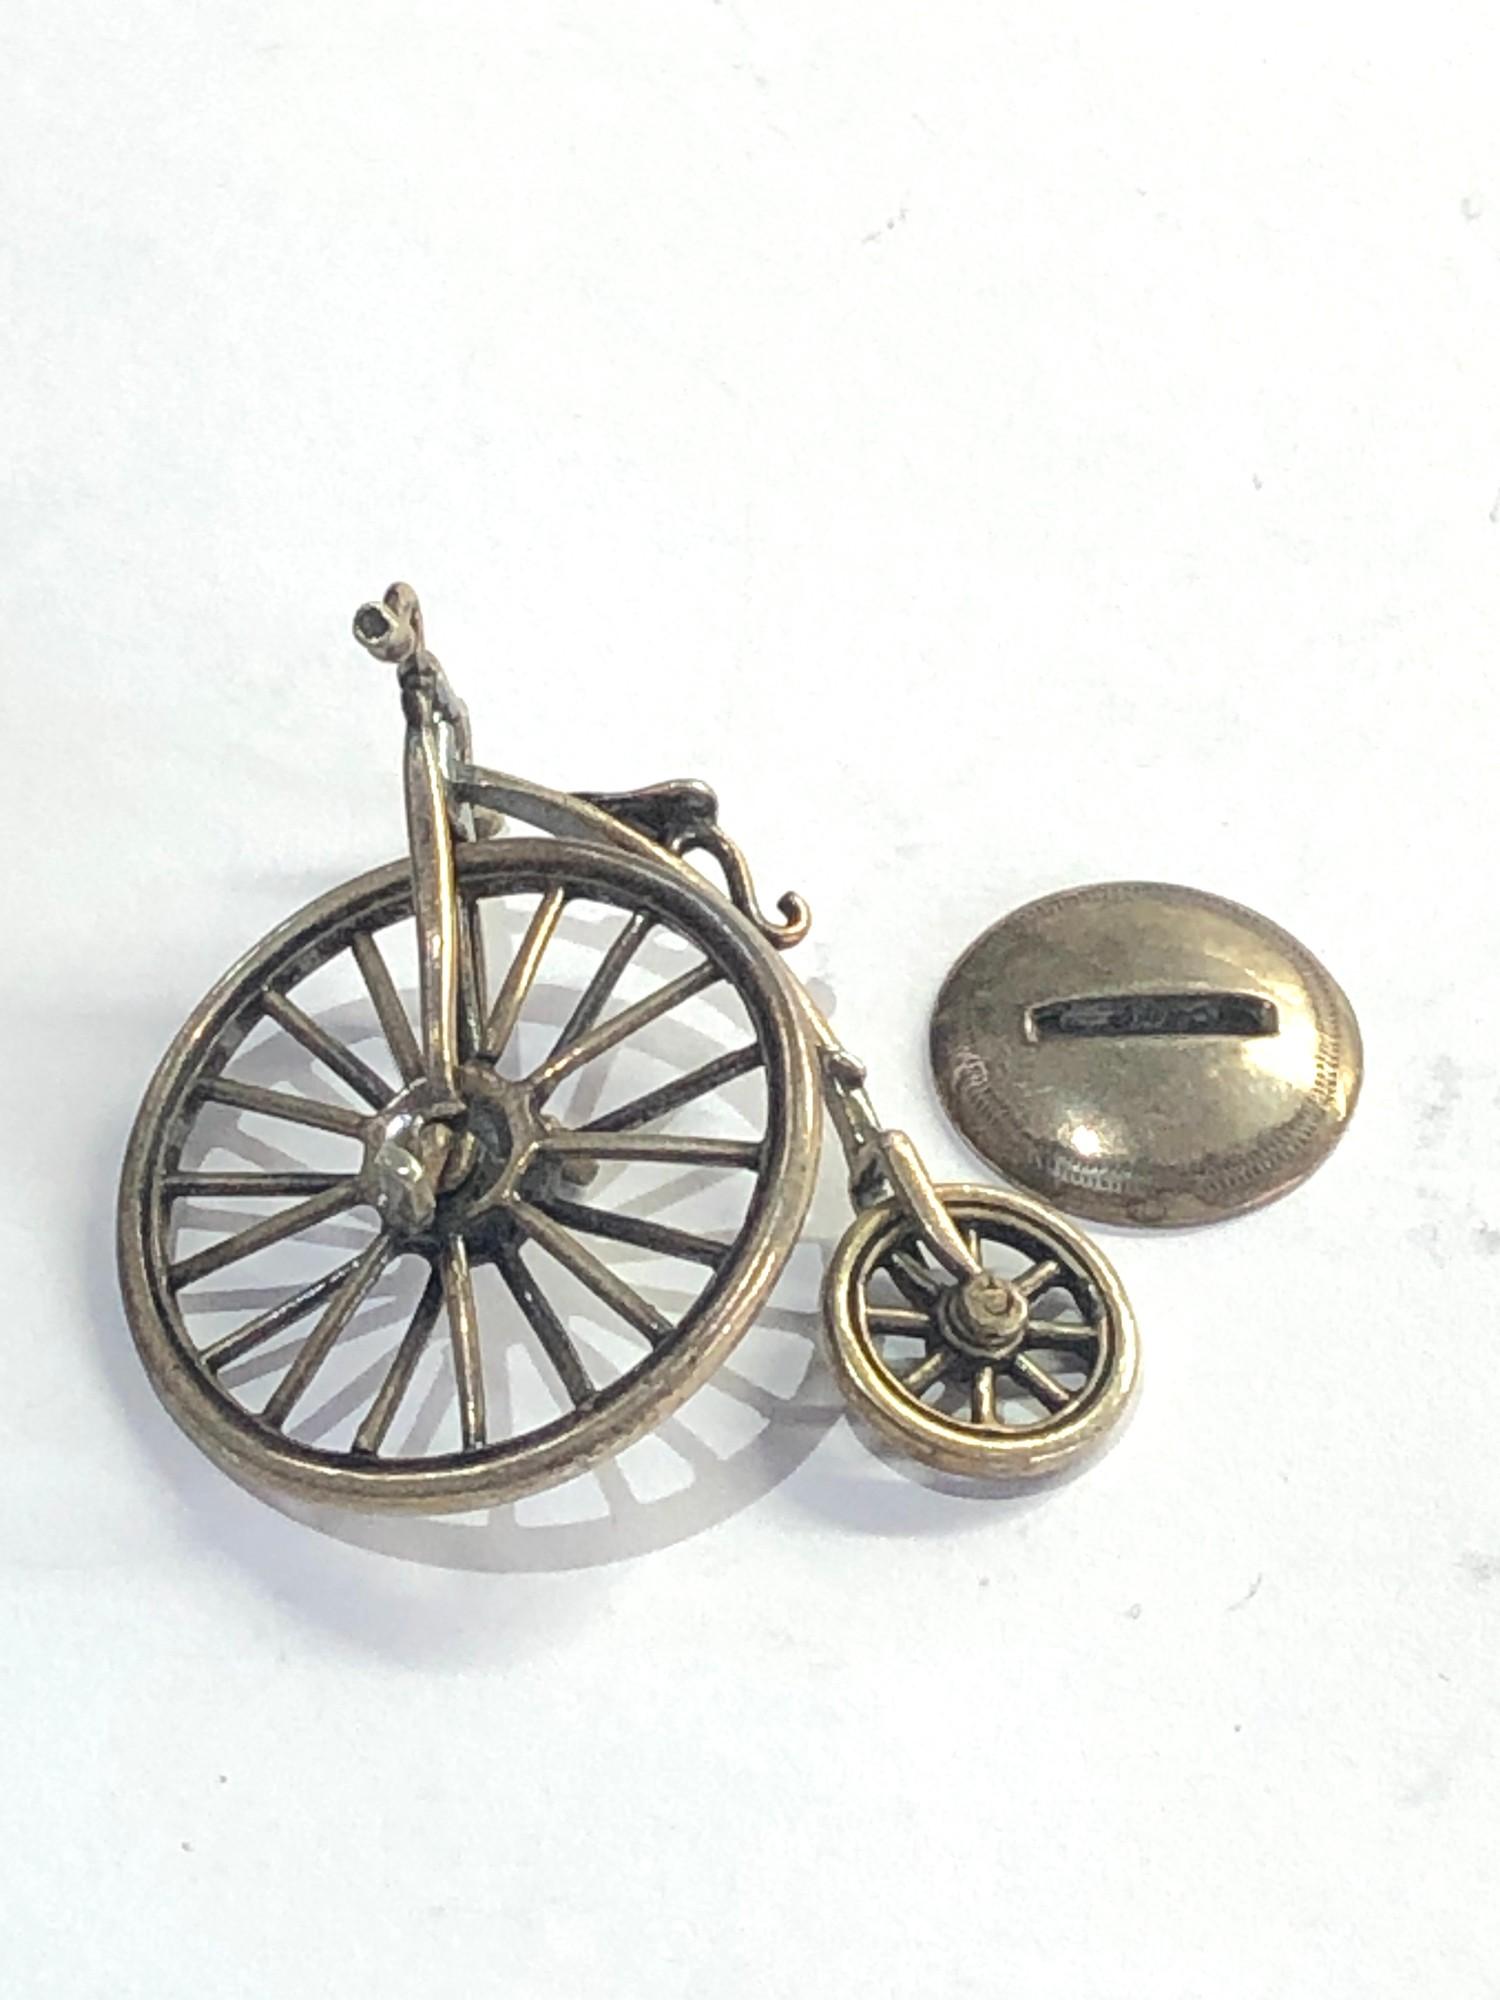 Vintage Dutch silver miniature penny farthing bike dutch silver hallmarks please see images for - Image 2 of 3